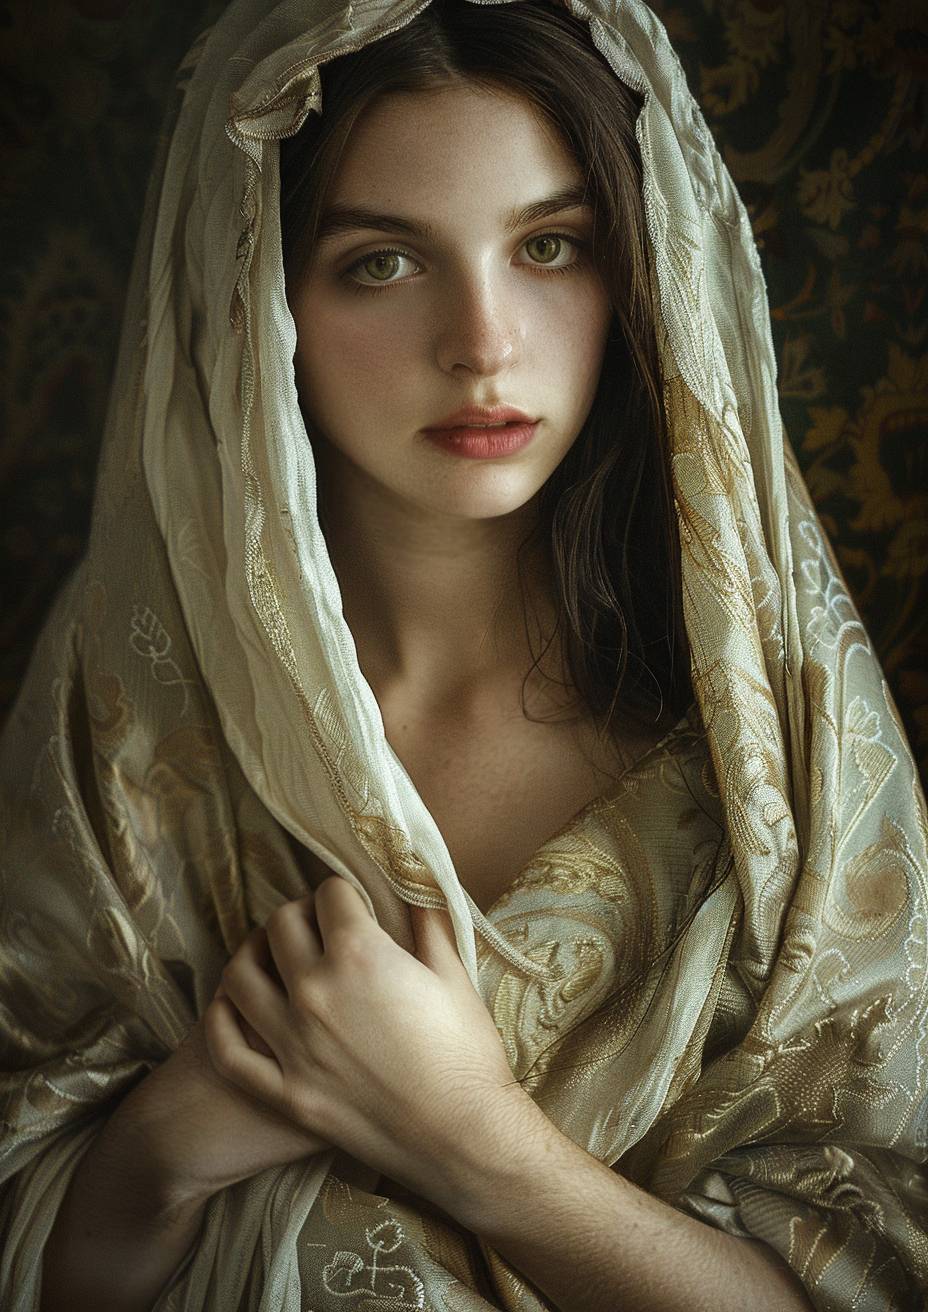 A young woman with ethereal beauty reminiscent of a young Felix Luna, captured in the timeless style of Giorgione, with soft lighting enhancing her delicate features, a subtle smile playing on her lips, draped in luxurious fabrics that cascade elegantly around her in a scene that exudes classical serenity and grace.